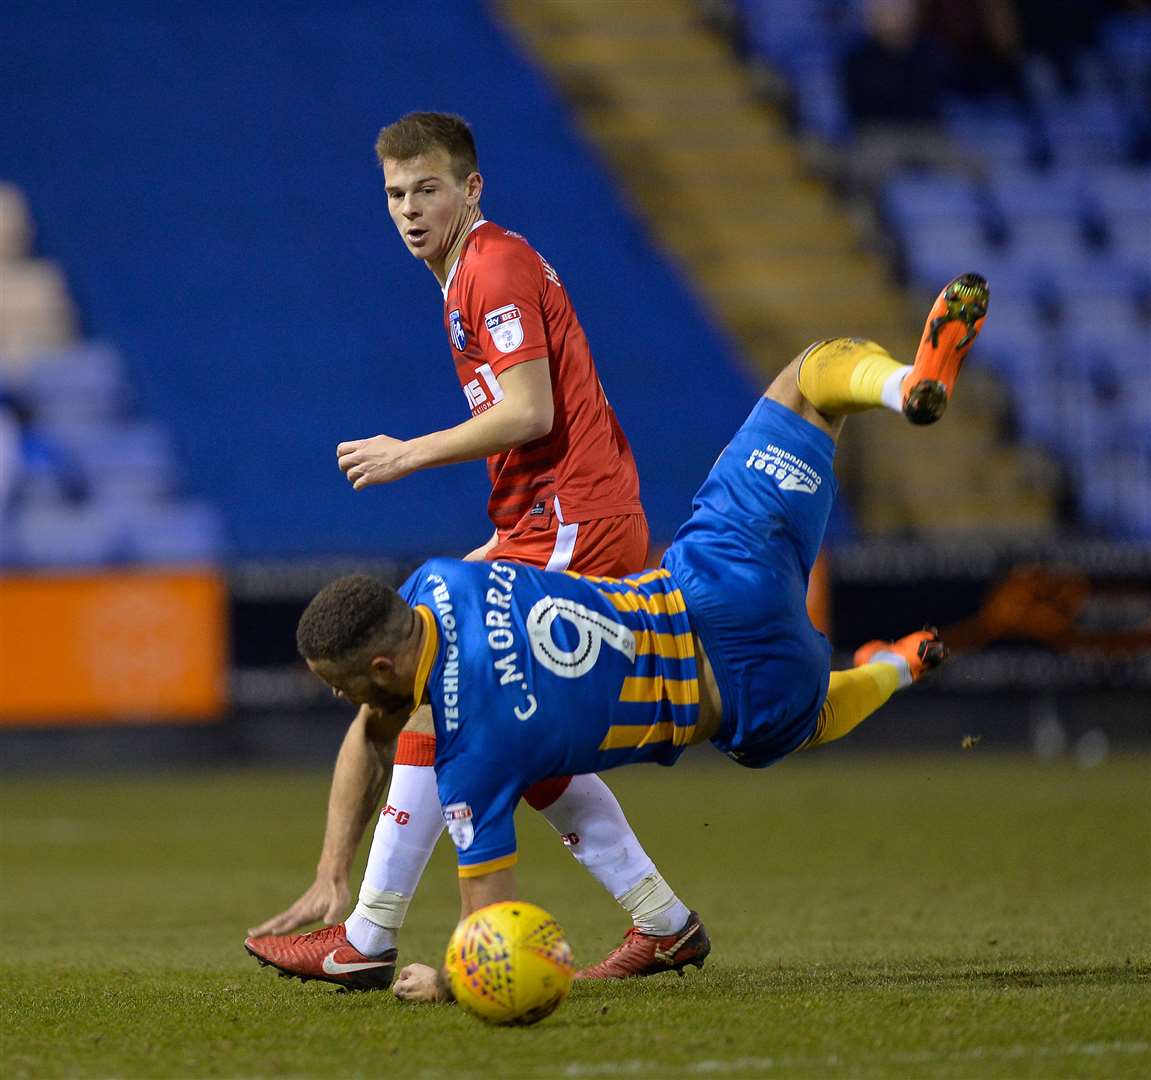 Jake Hessenthaler busy in midfield Picture: Ady Kerry